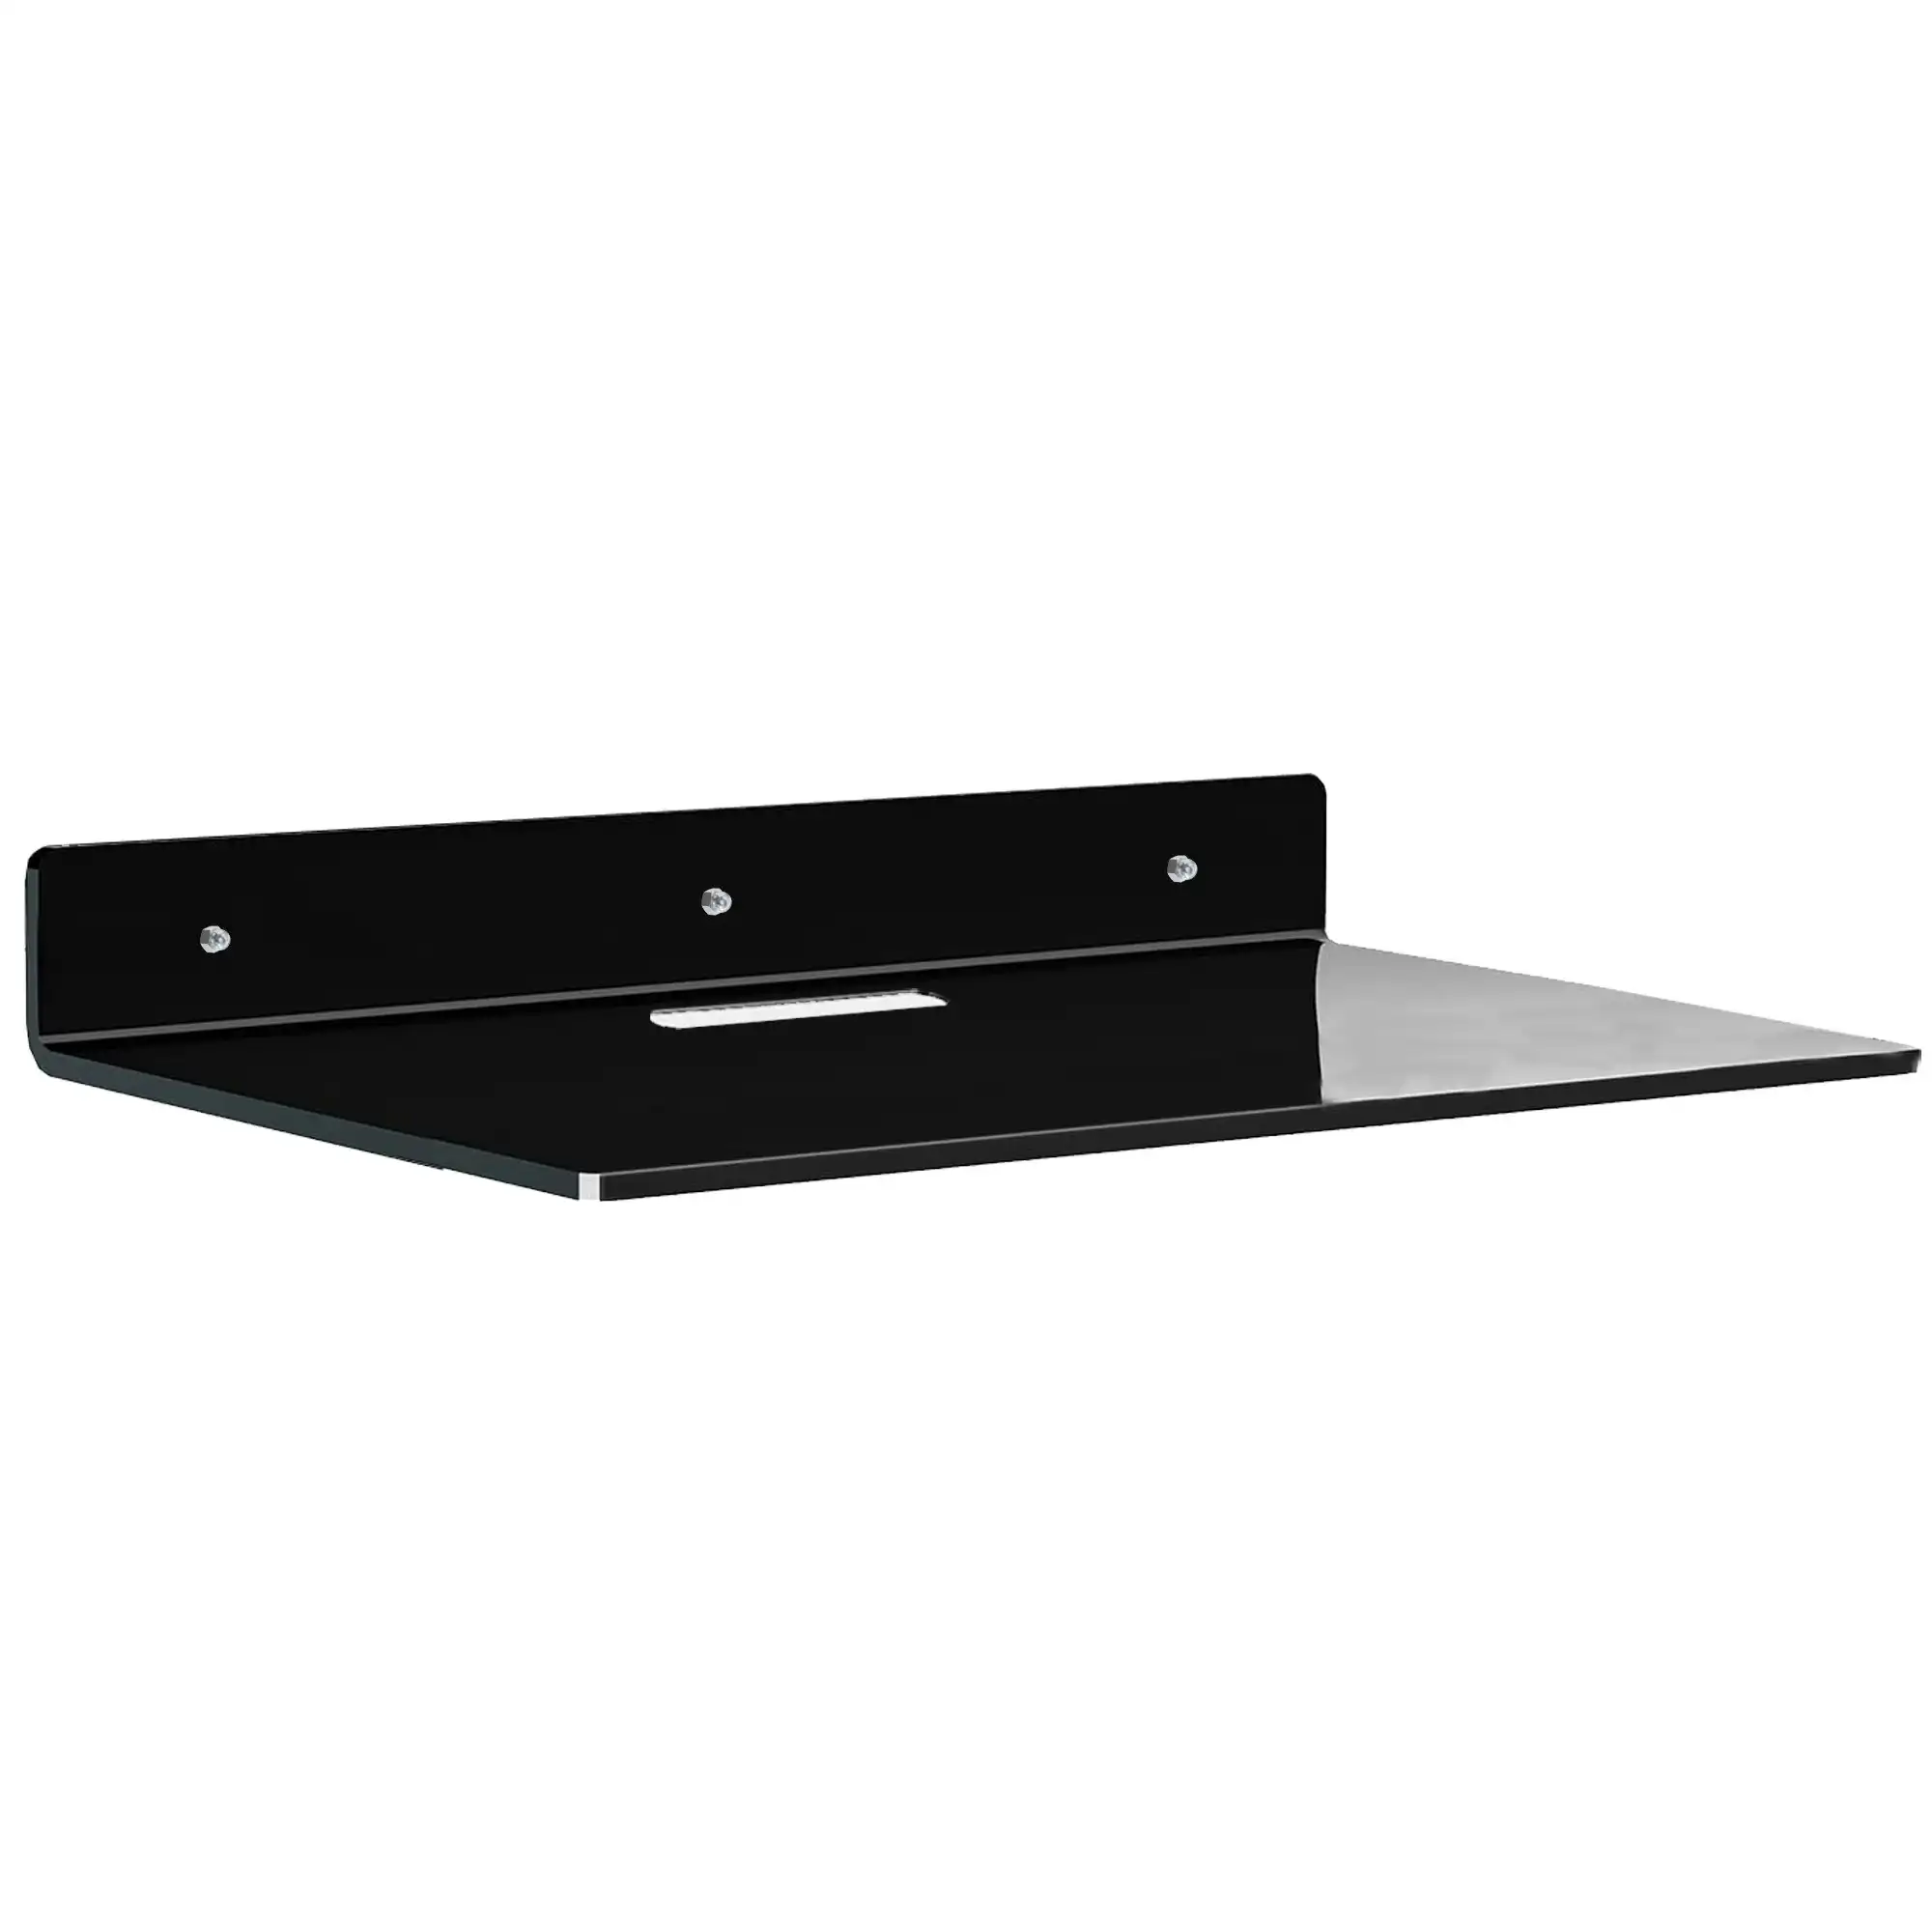 Floating Acrylic Wall Shelf Wall Mounted Display Stand Router Storage Shelve 30 x 20 cm - Black